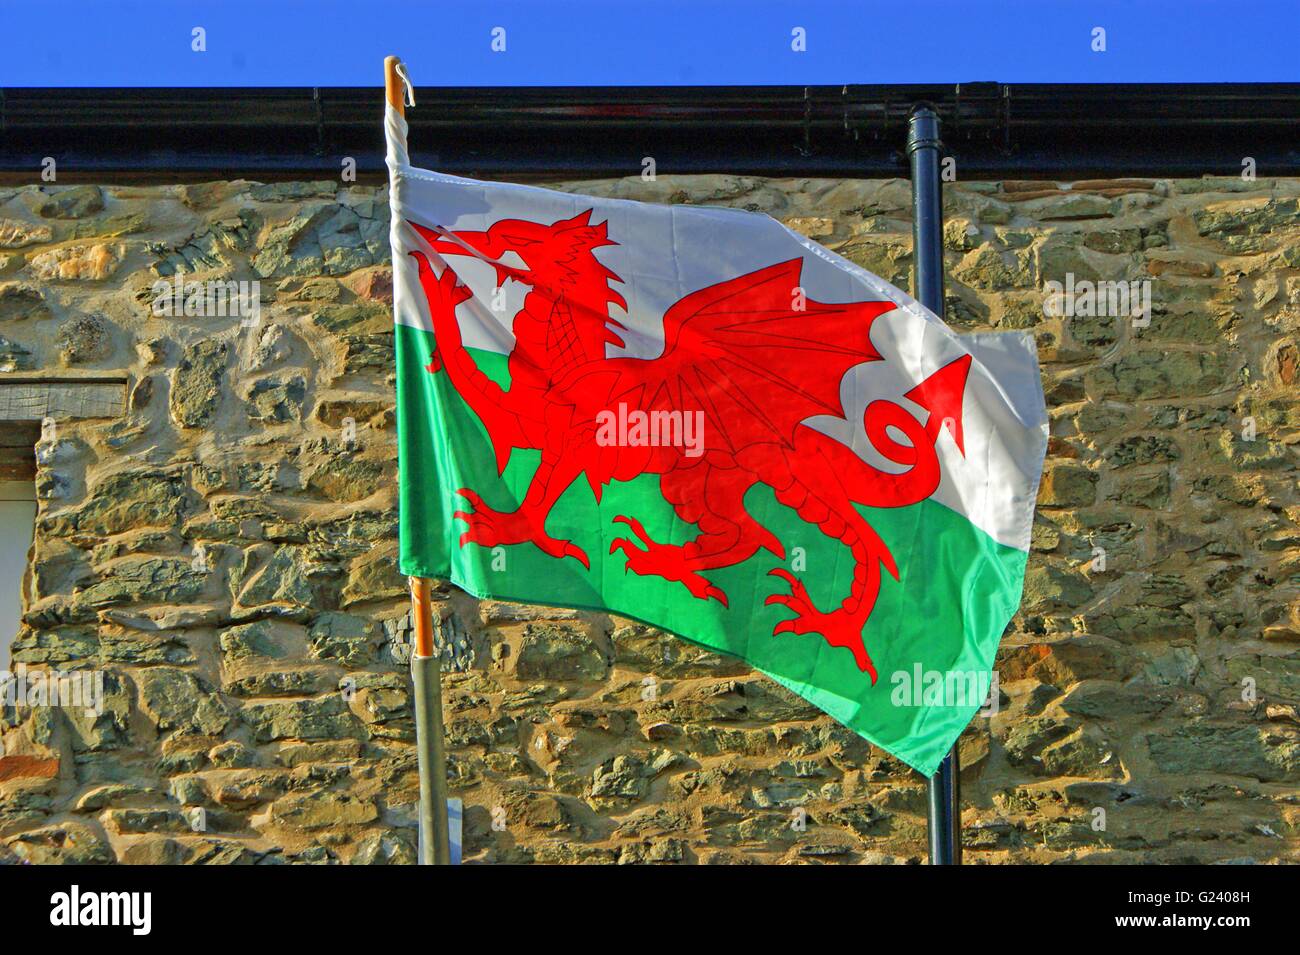 Welsh Flag - Flag of Wales, showing the Red Dragon of Wales and Red White Stock Photo